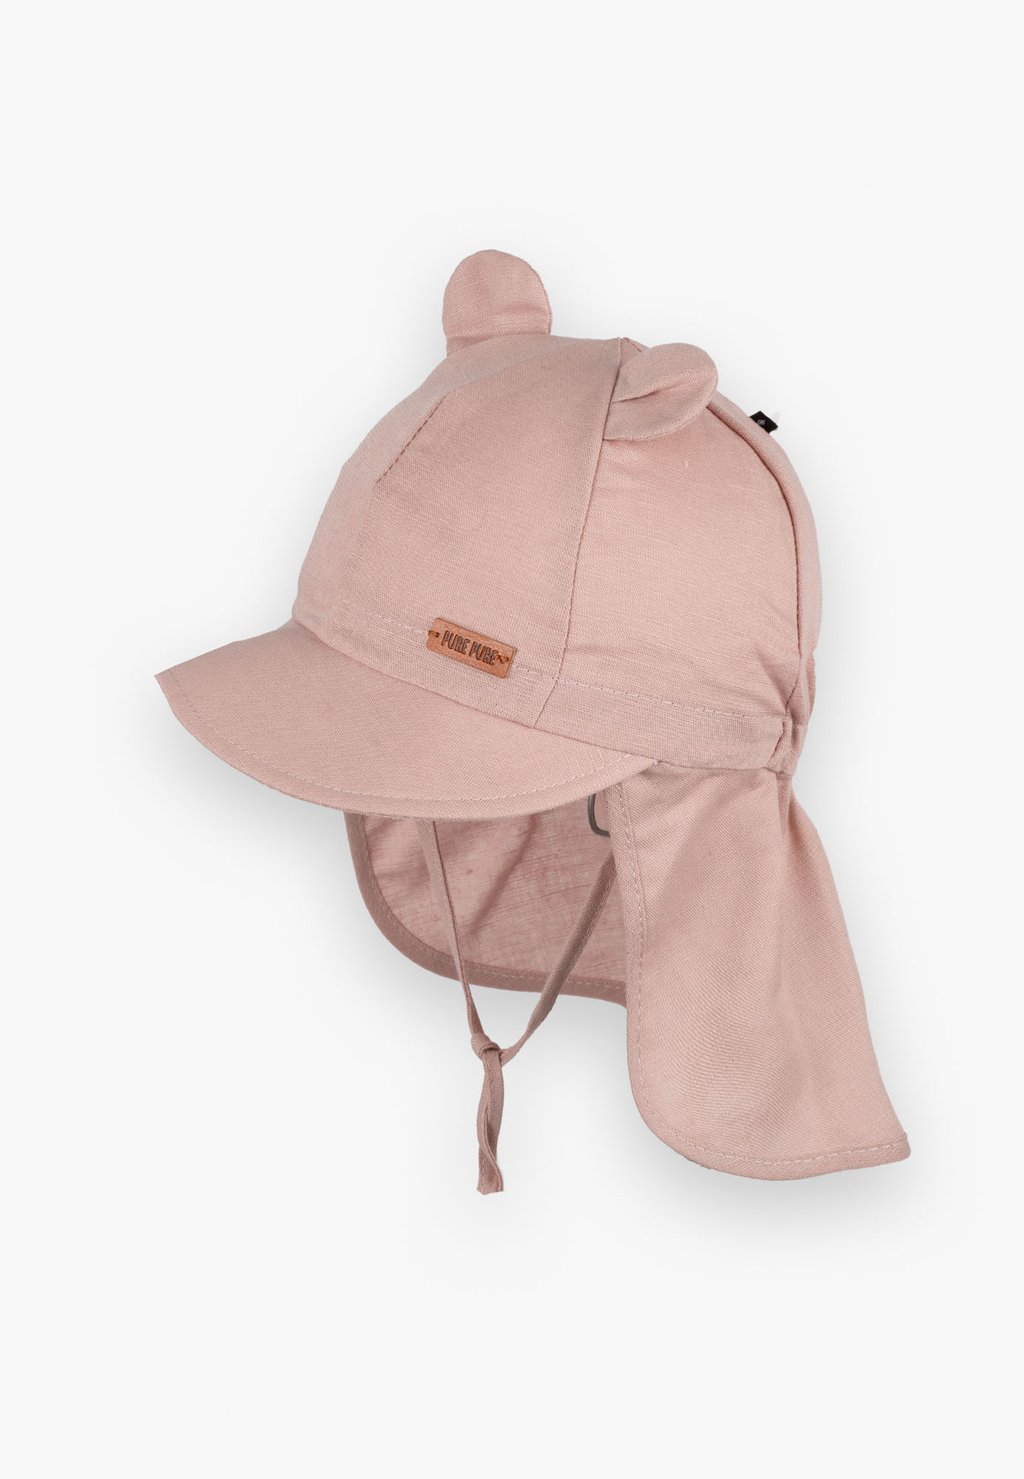 Панама HAT WITH EARS UNISEX pure pure by BAUER, цвет light pink